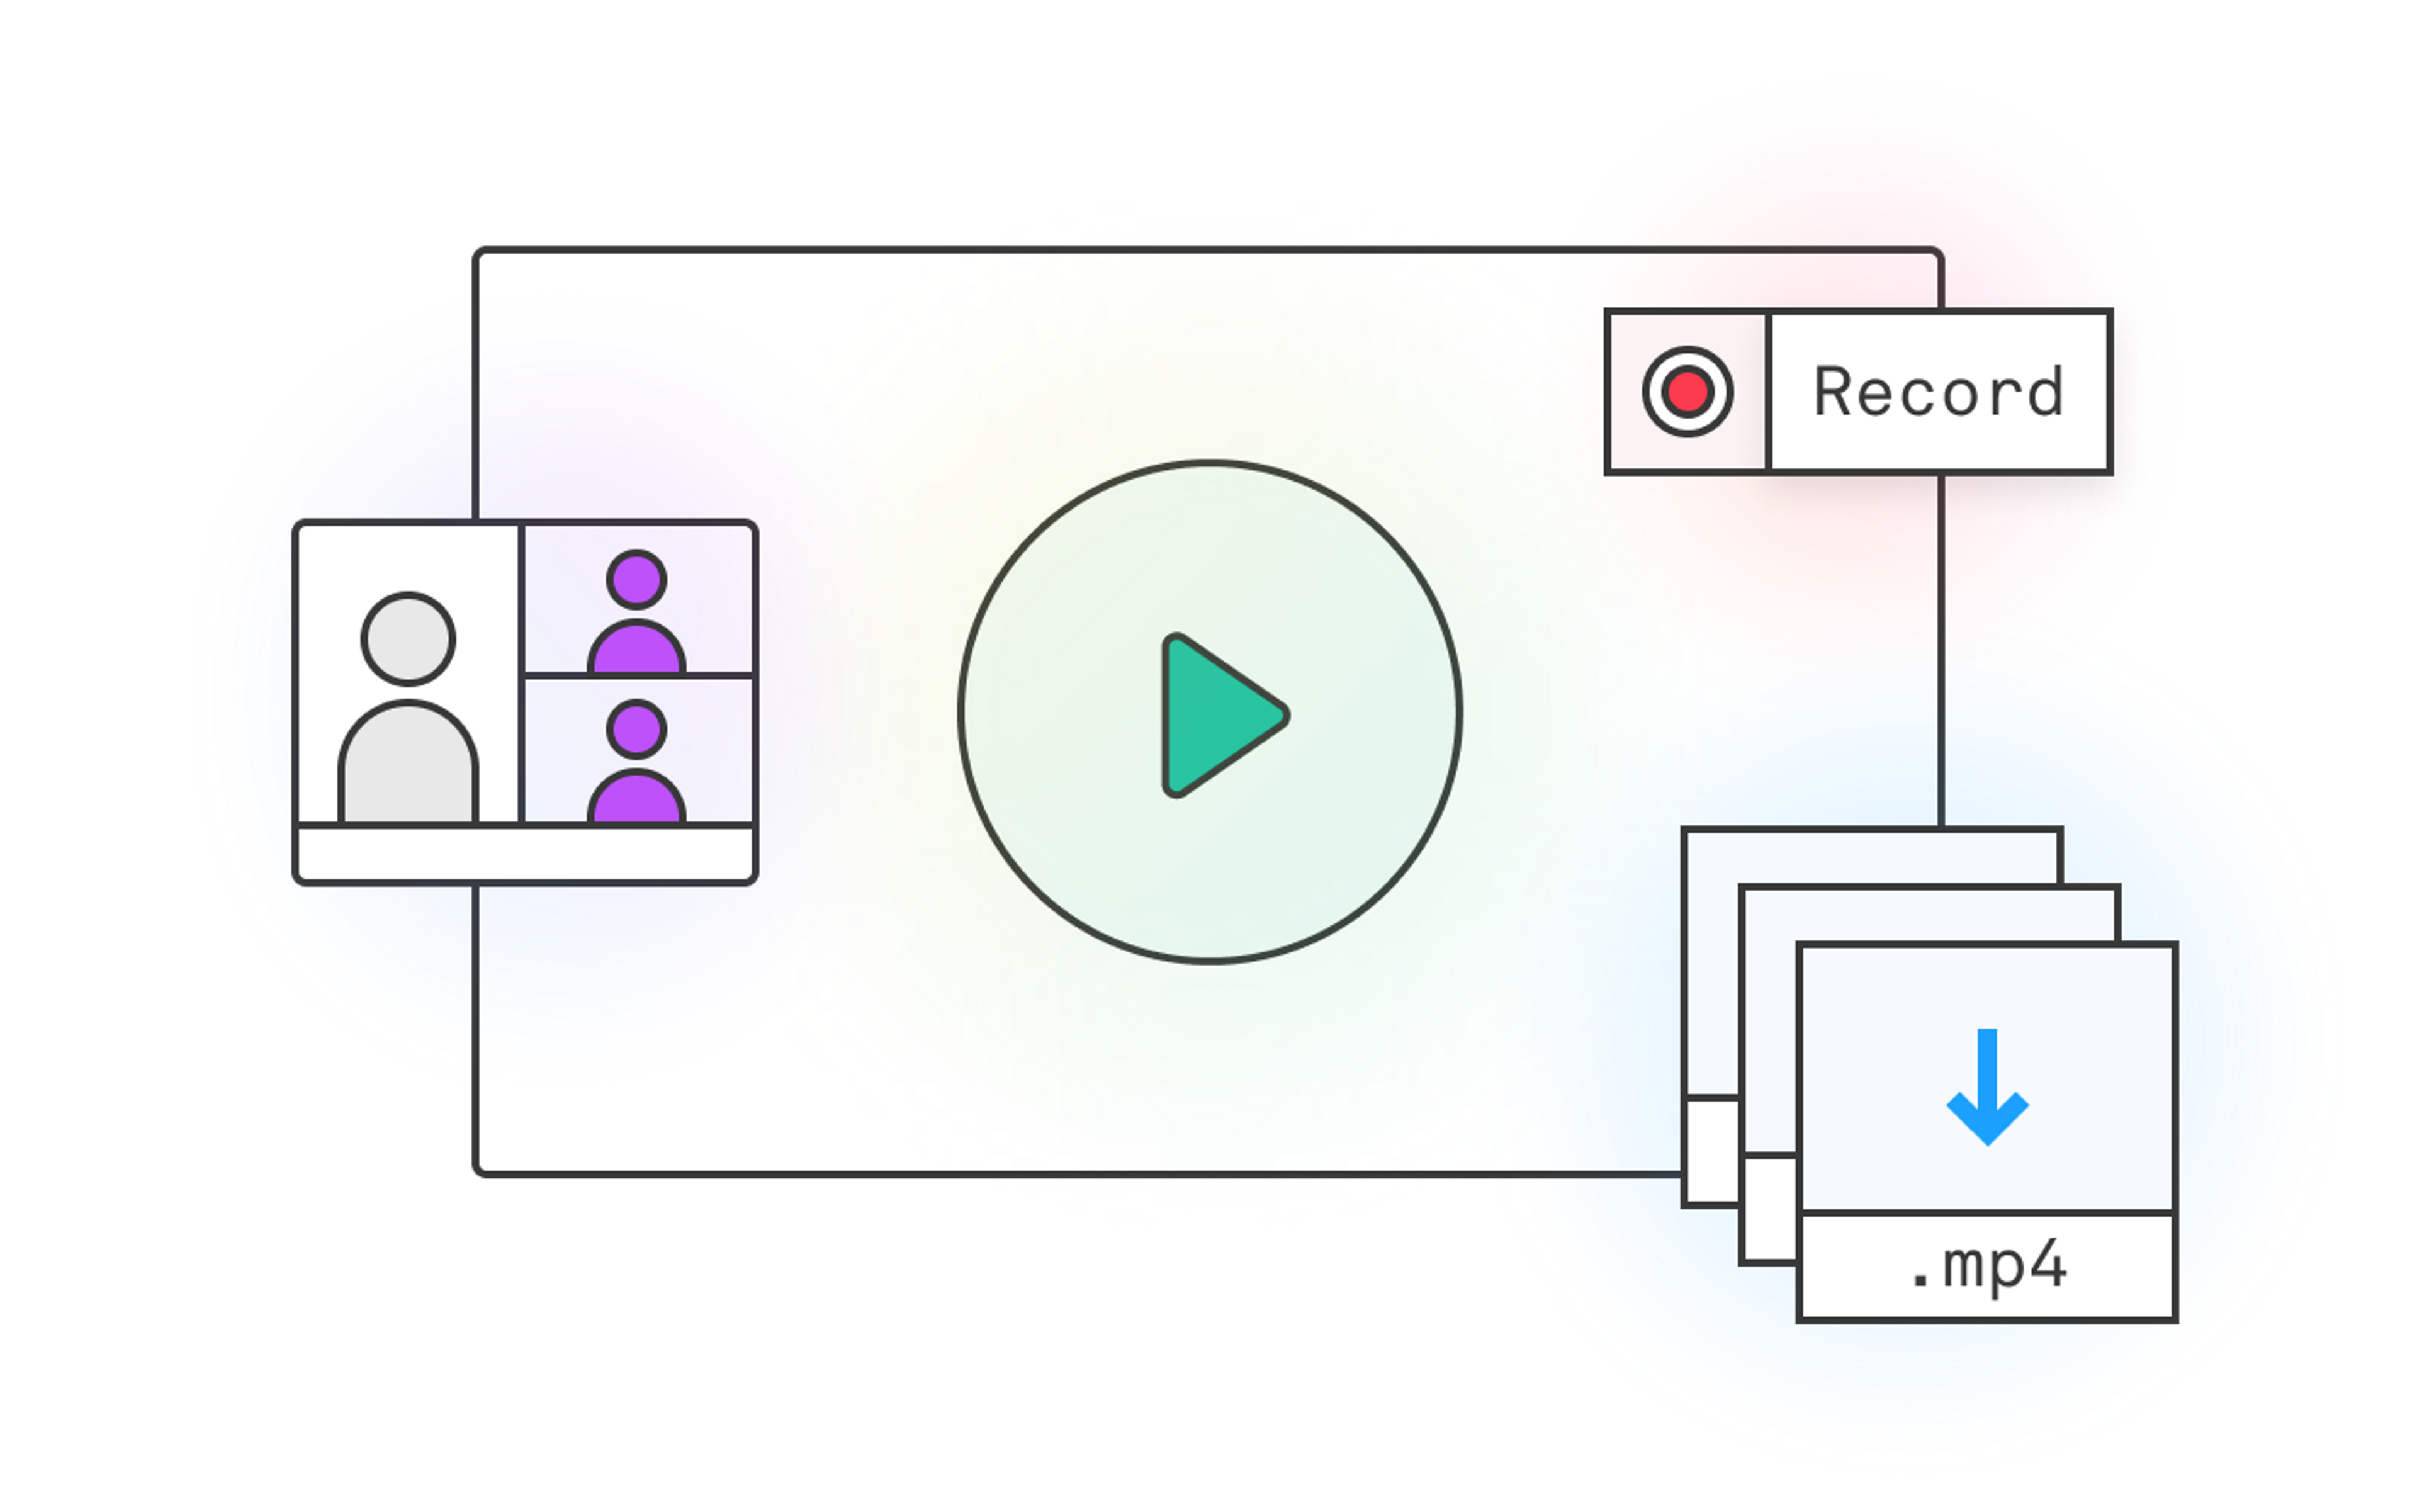 A video player with a recording indicator, a real-time video chat, and an mp4 download